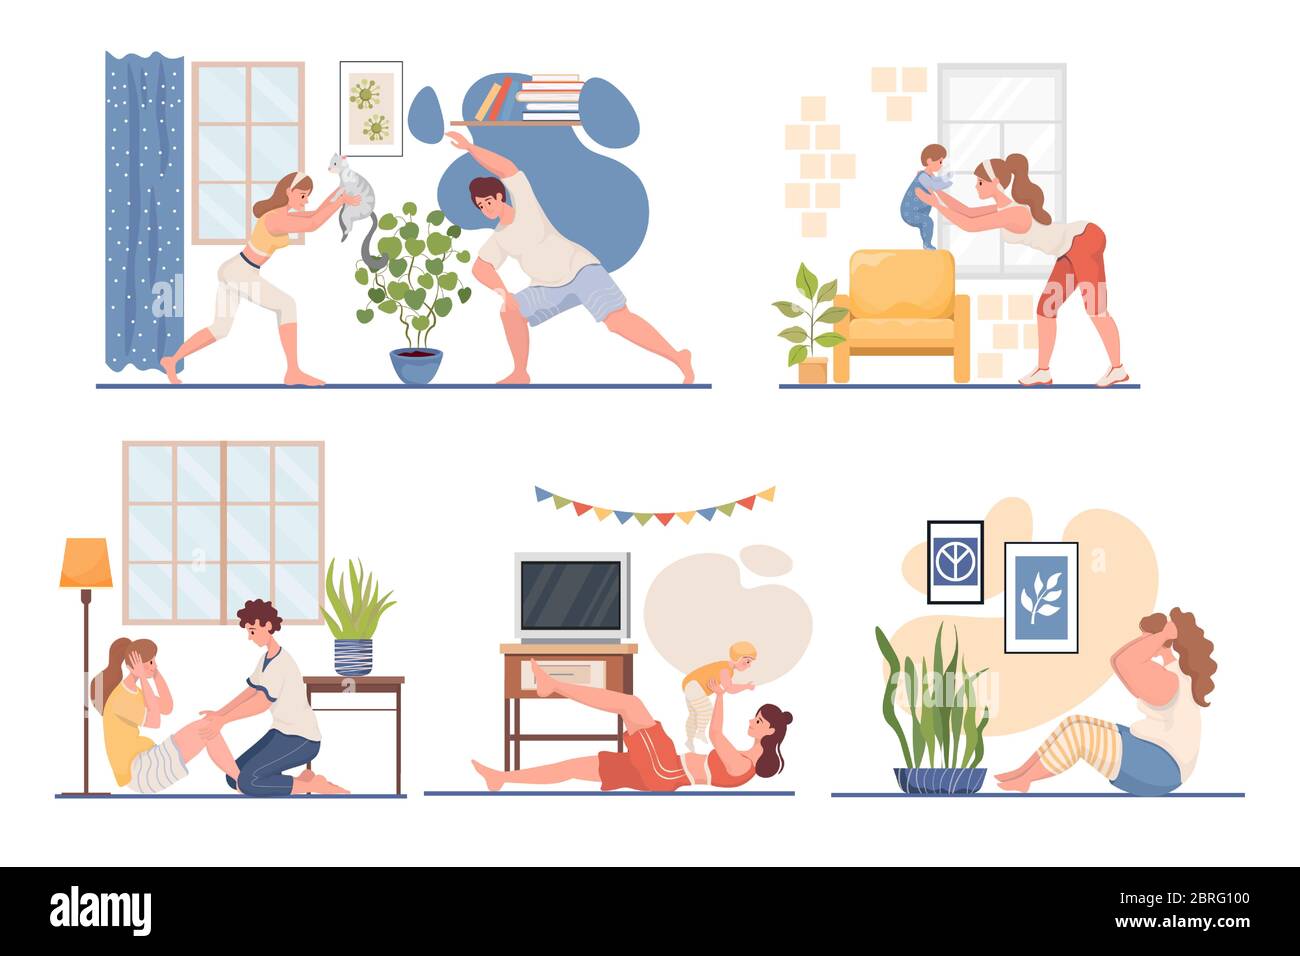 Happy young men and women doing sport at home vector flat illustration. Fitness workout in the living room during coronavirus outbreak. Stay home and do yoga, healthy lifestyle concept. Stock Vector